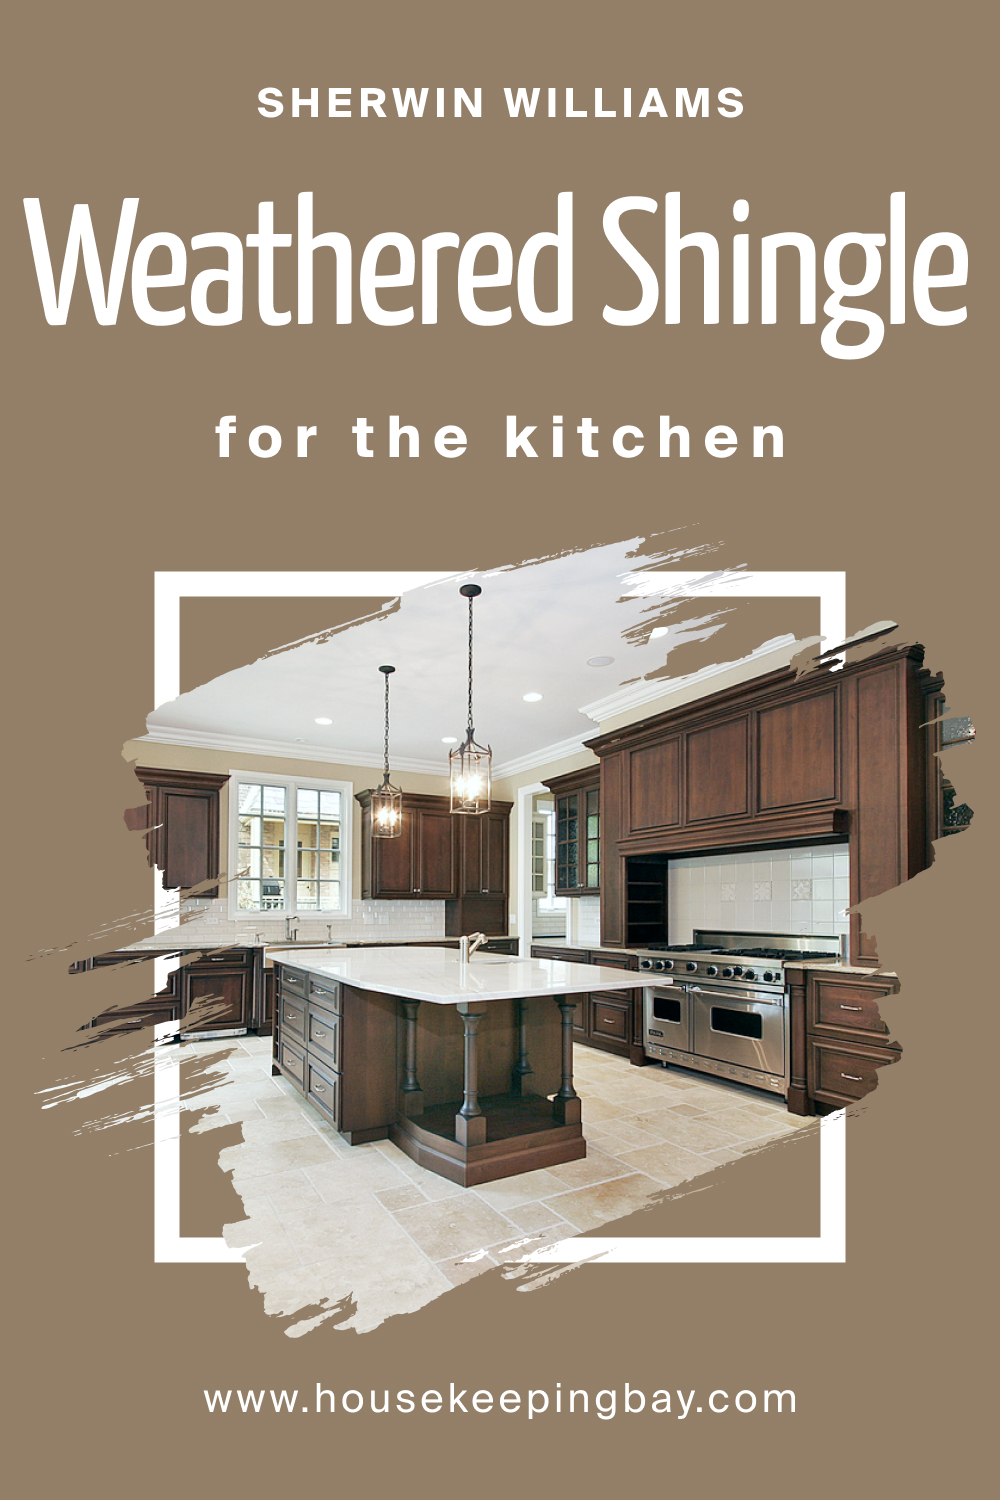 Sherwin Williams. SW 2841 Weathered Shingle For the Kitchens